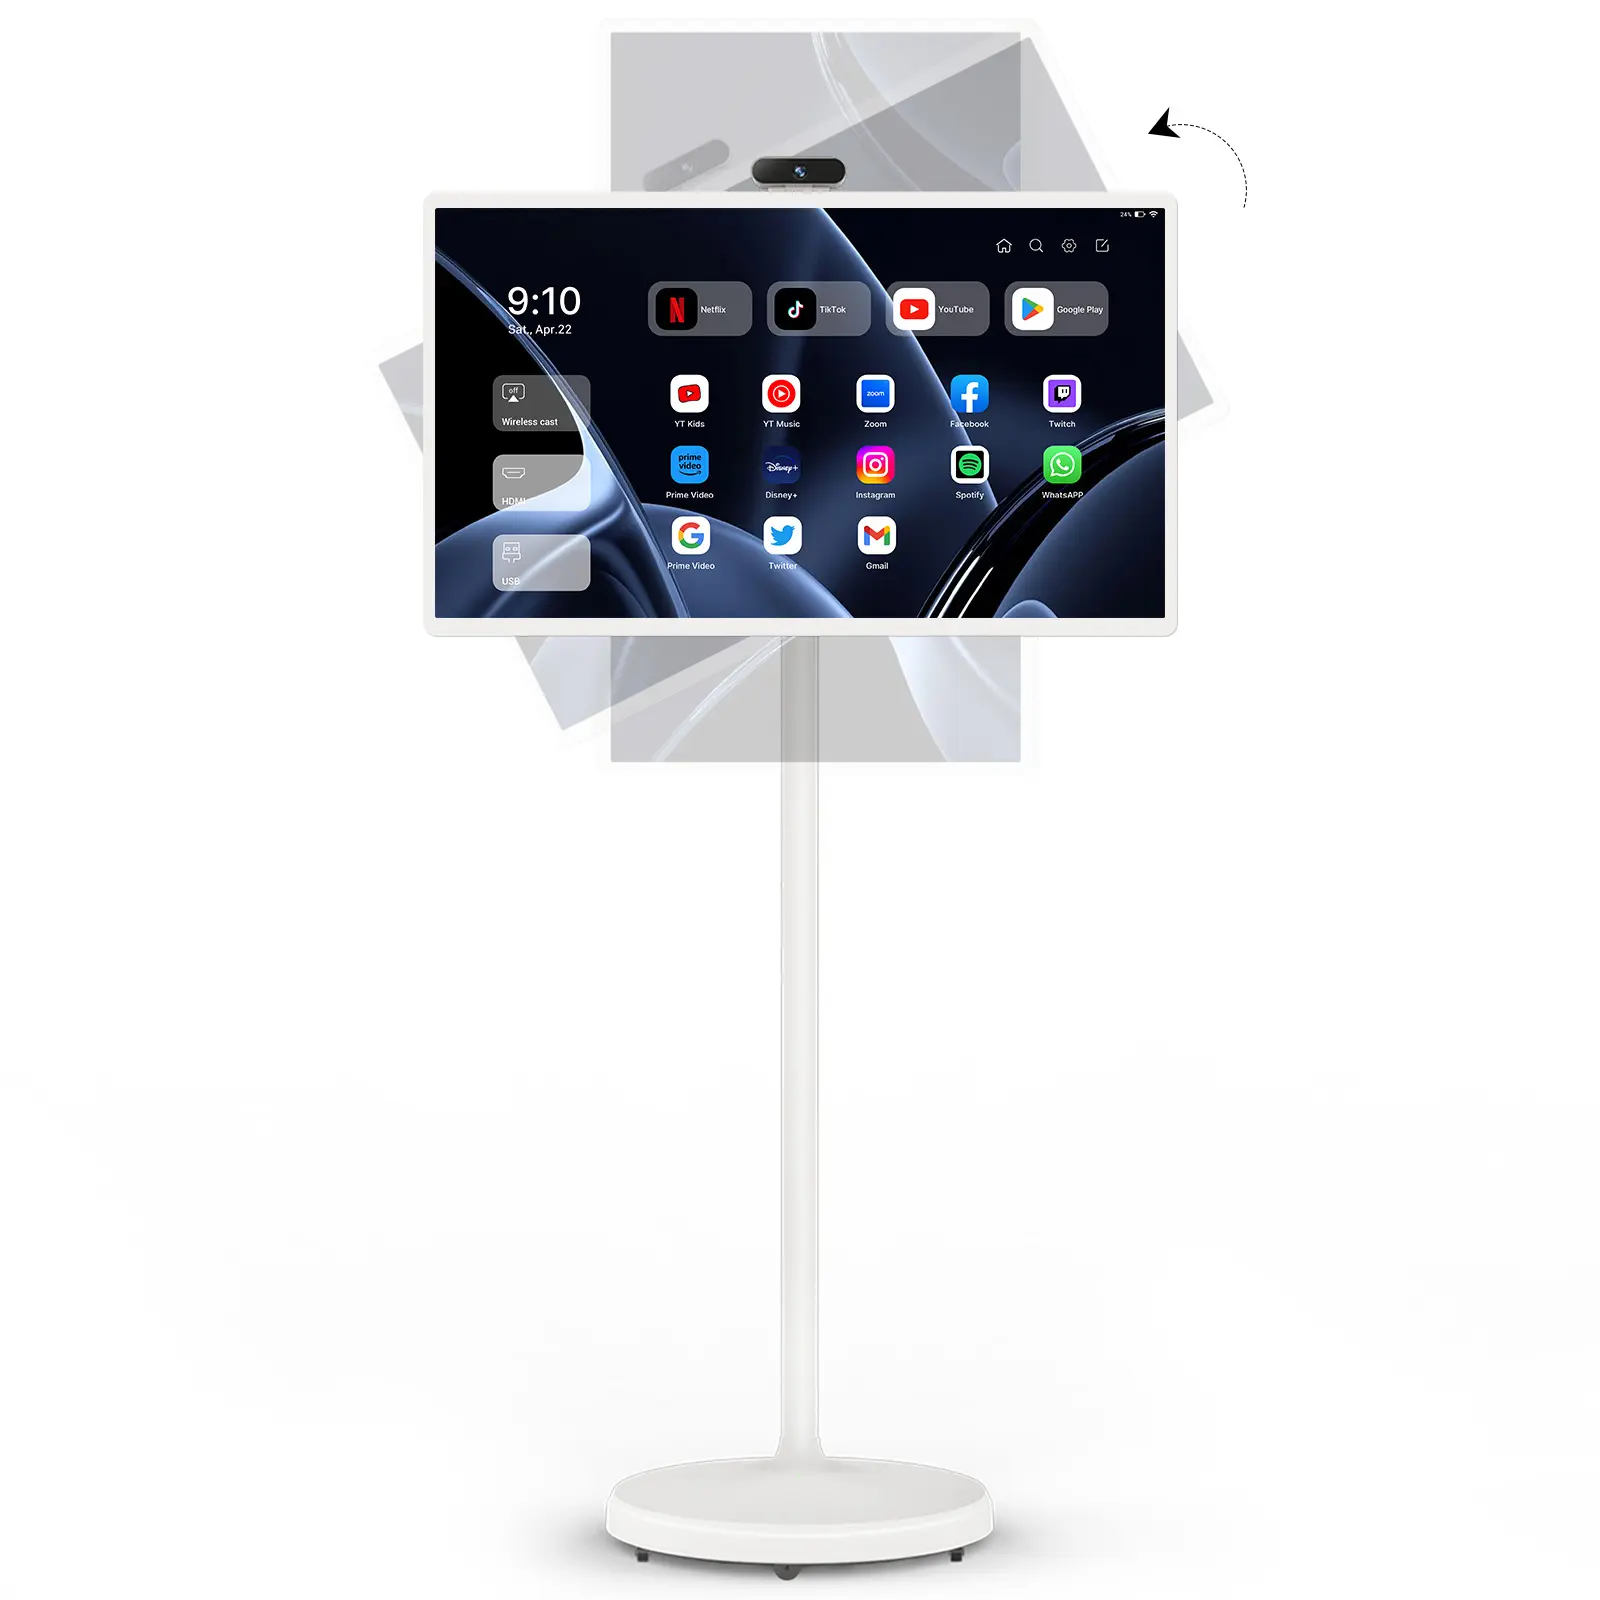 Est Elling 32 Inch tandby e 1080P table ortable Touch crecreen ndroid abablet